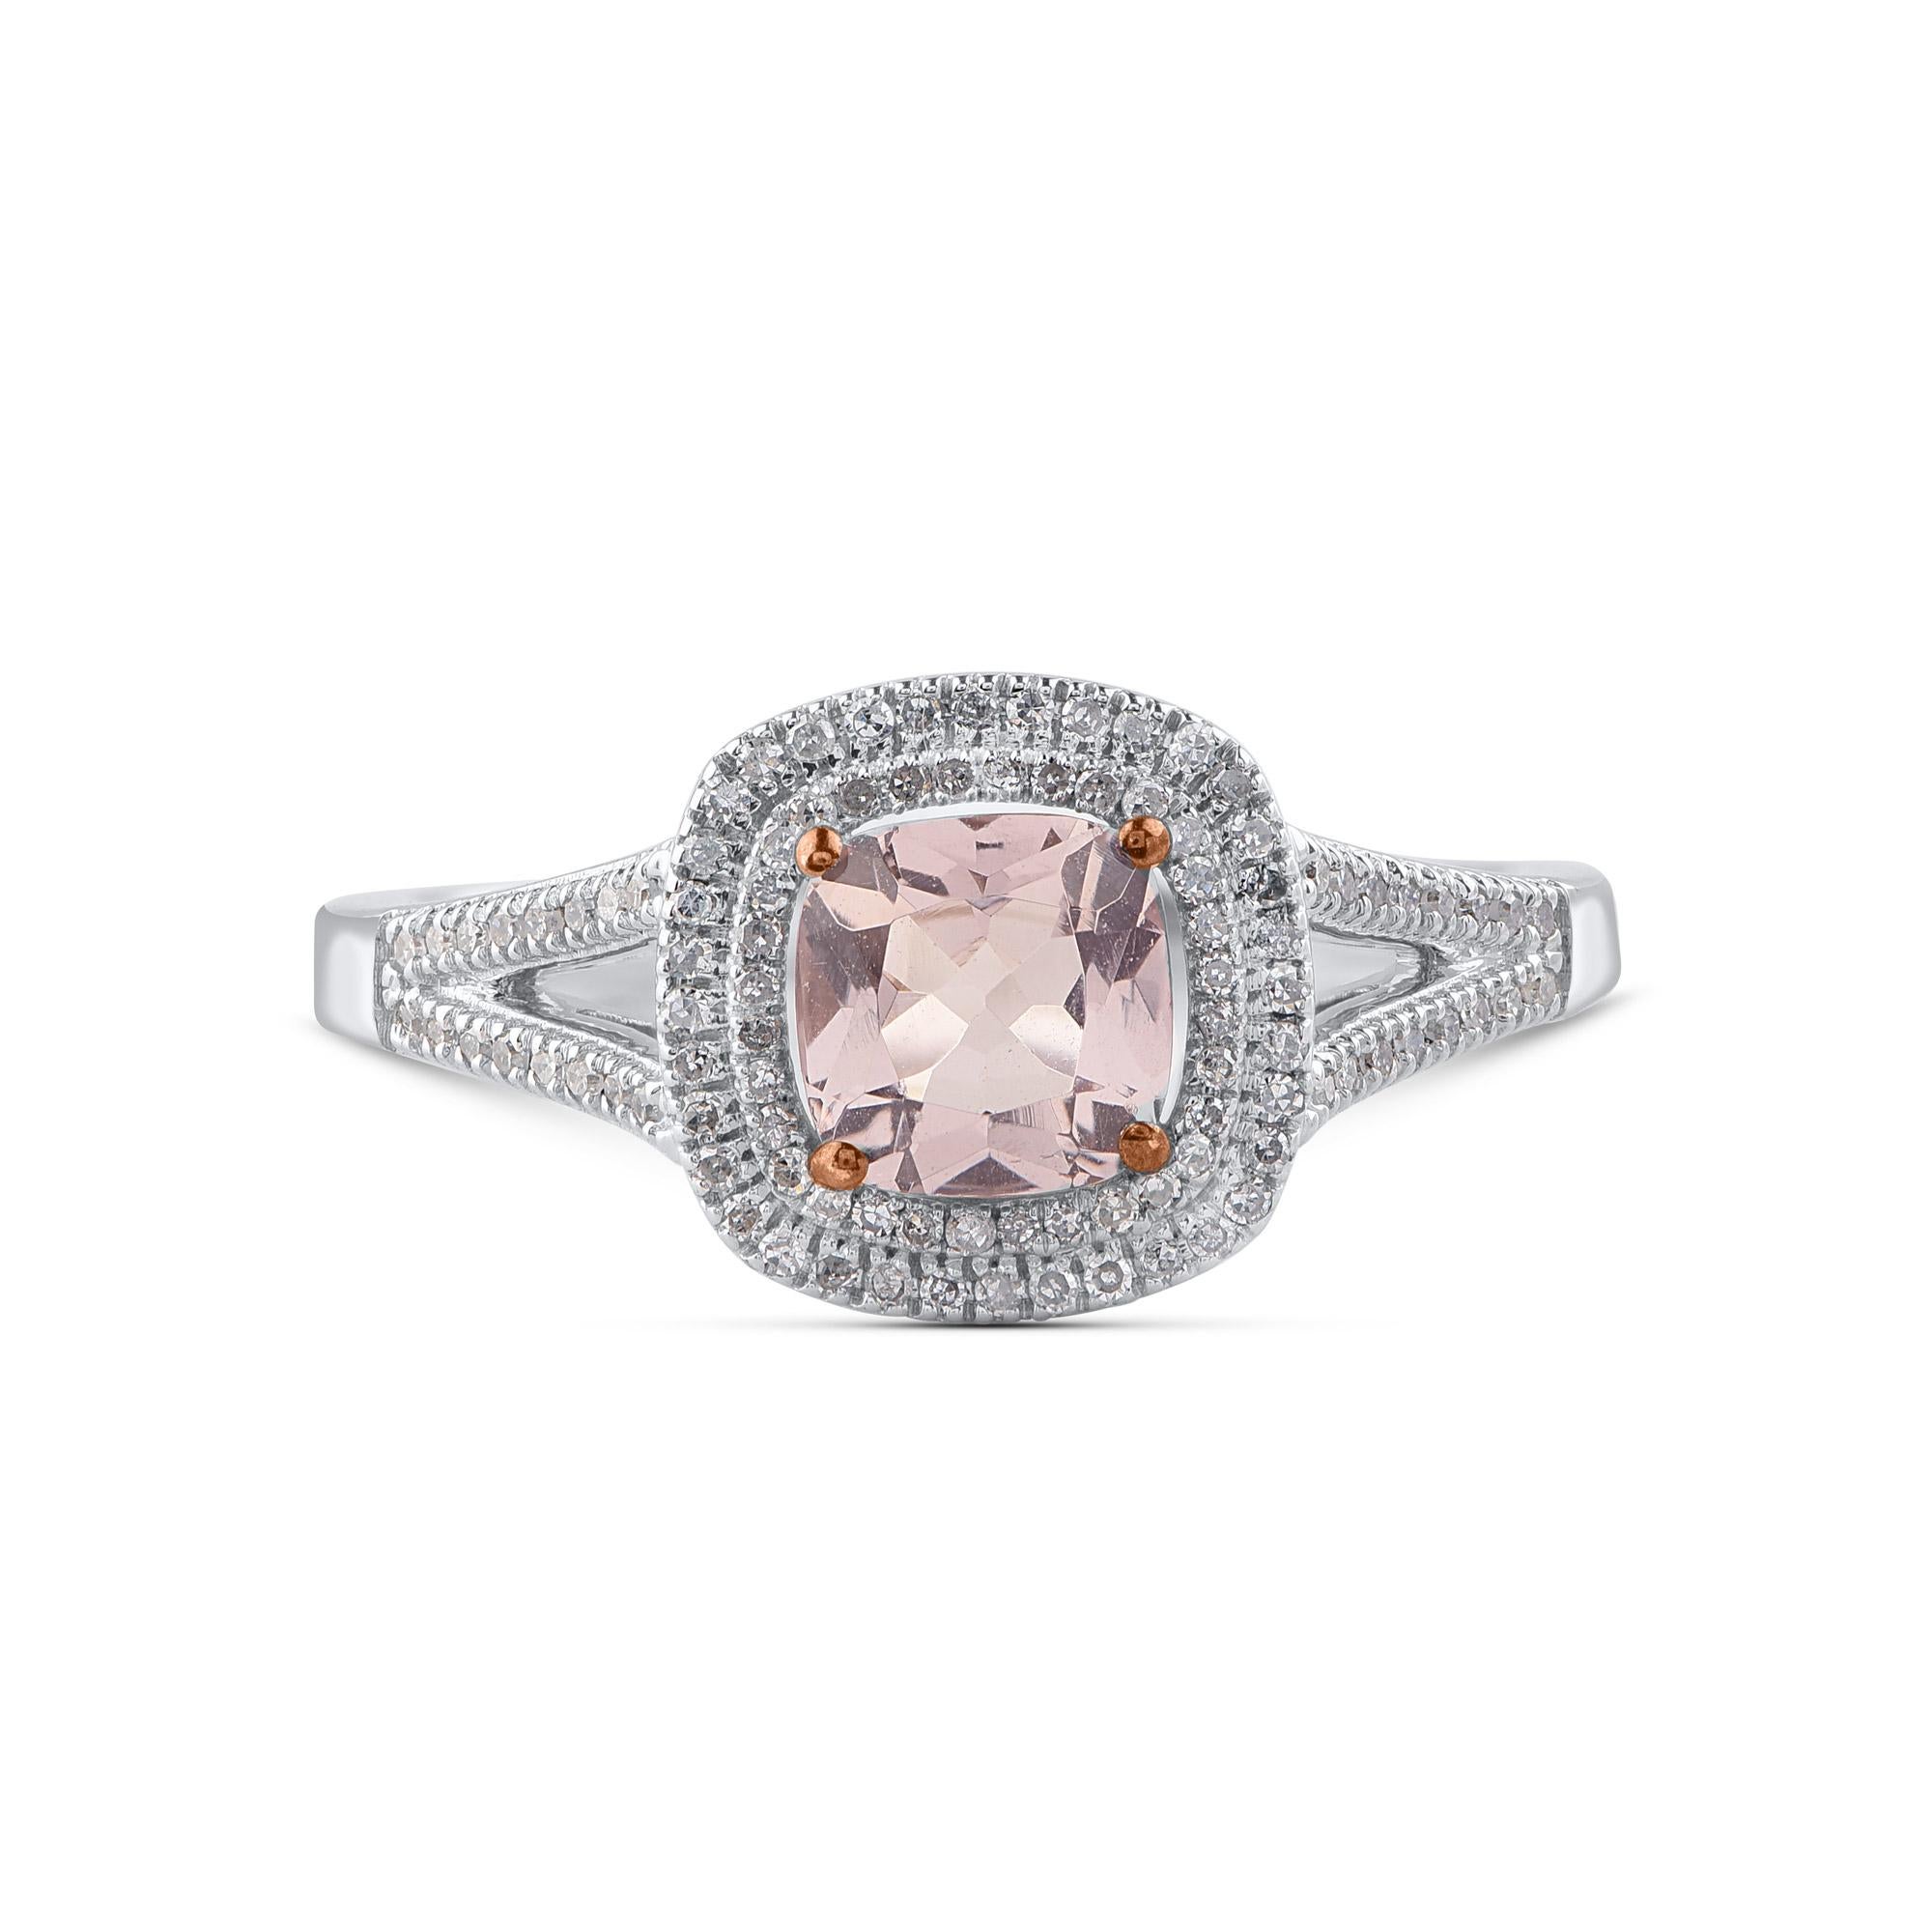 Crafted beautifully in 14 kt white gold and this sparkling design studded with 100 round-cut diamonds and 1 morganite in prong and micro-prong setting. Diamonds are graded H-I Color, I3-I4 Clarity. Ring size is US size 7 and can be resized on